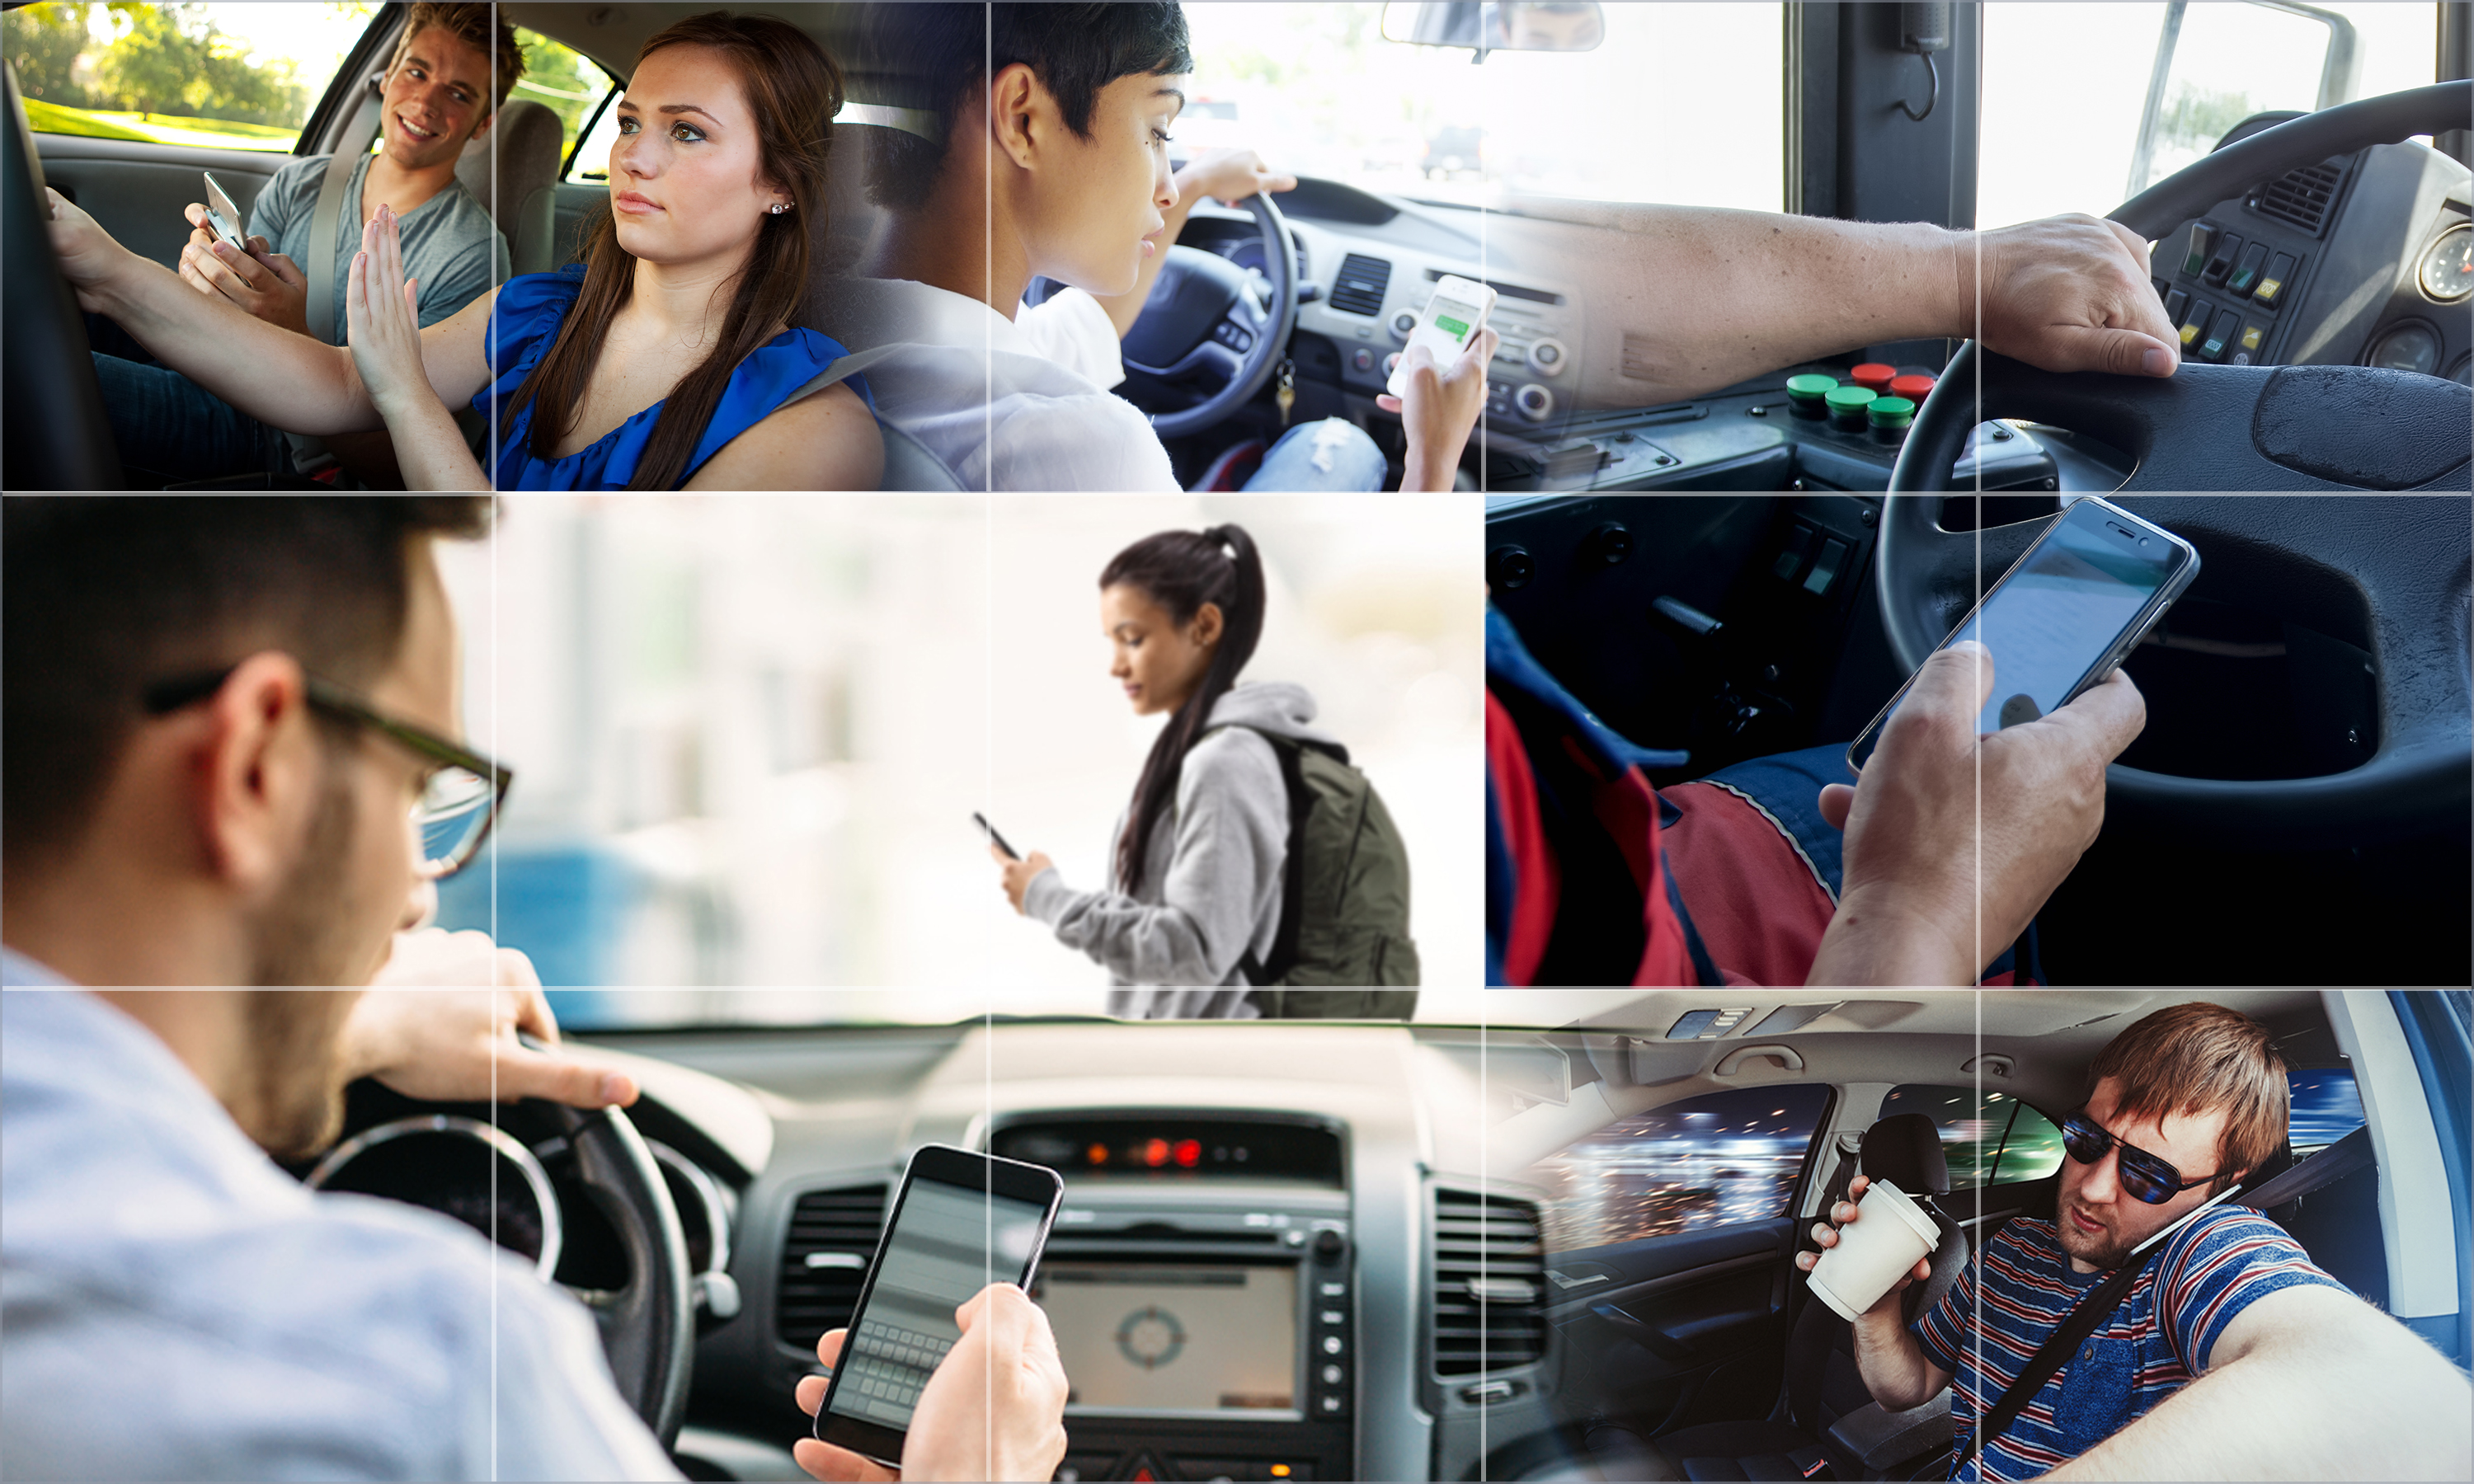 Distracted Driving Images